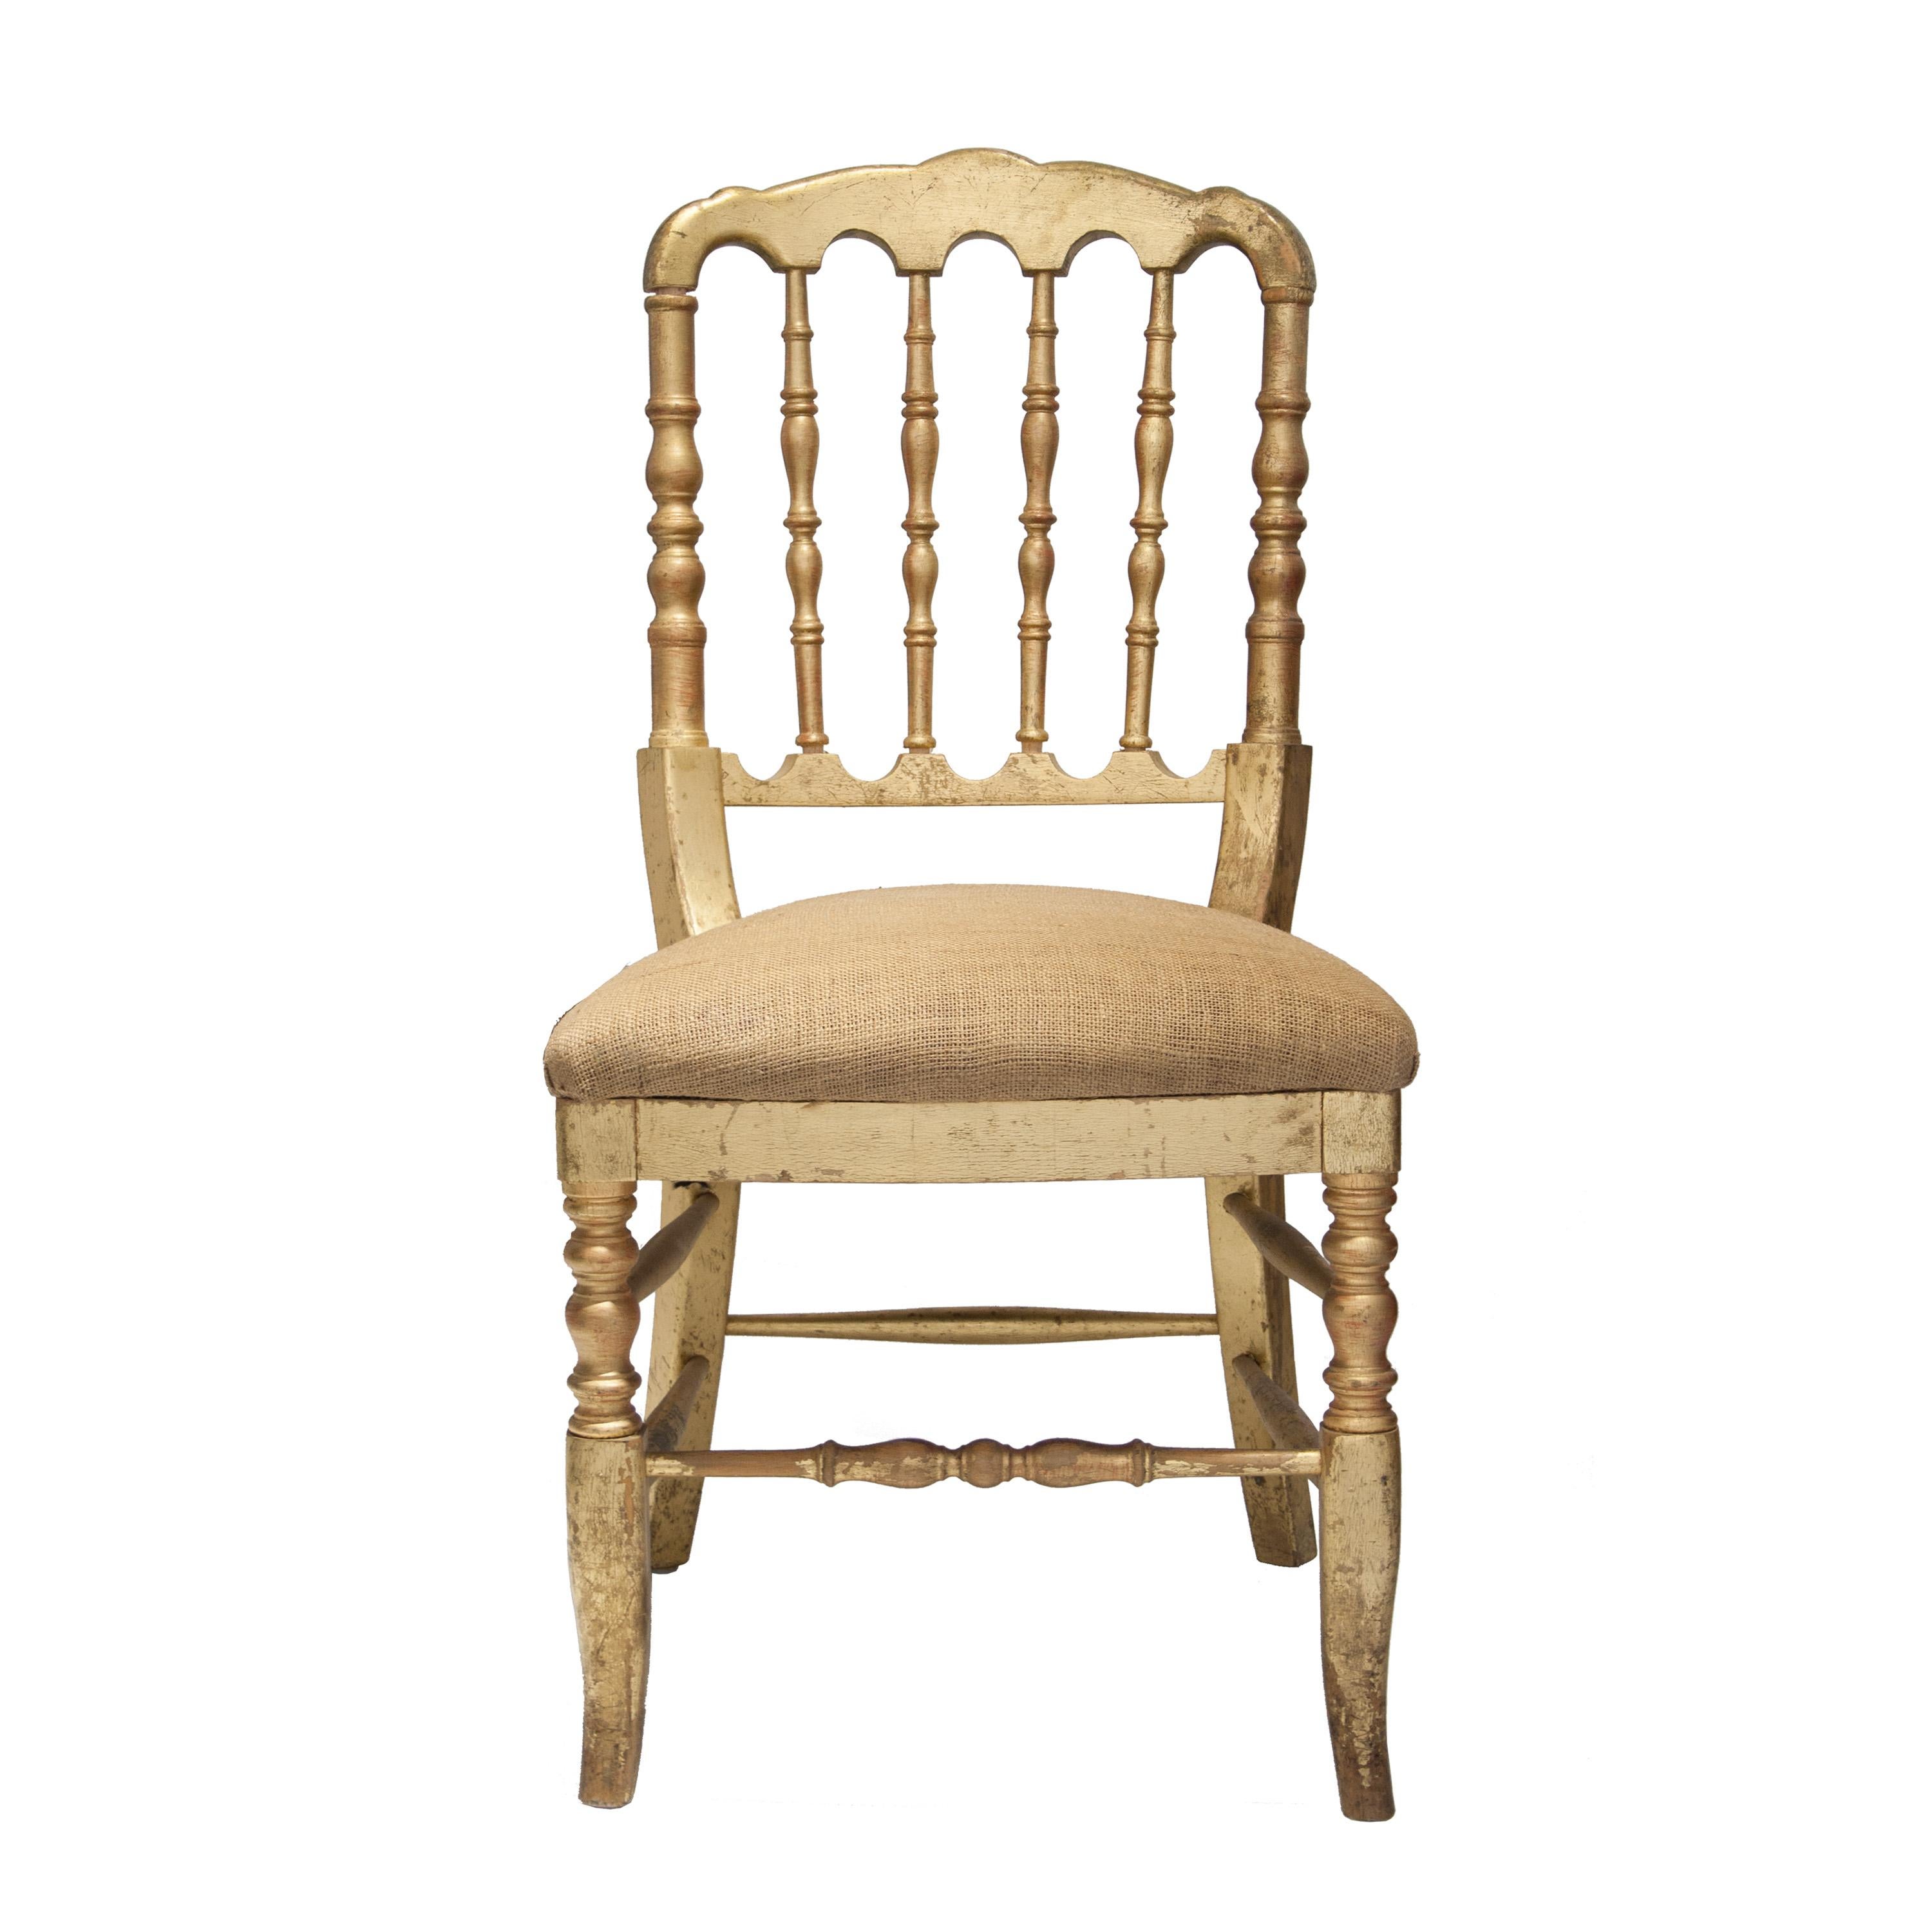 Set of 50 chairs, sold by units. Napoleon style solid wooden hand-crafted chairs. With turned bars in the back and turned legs. Gold leaf finished.